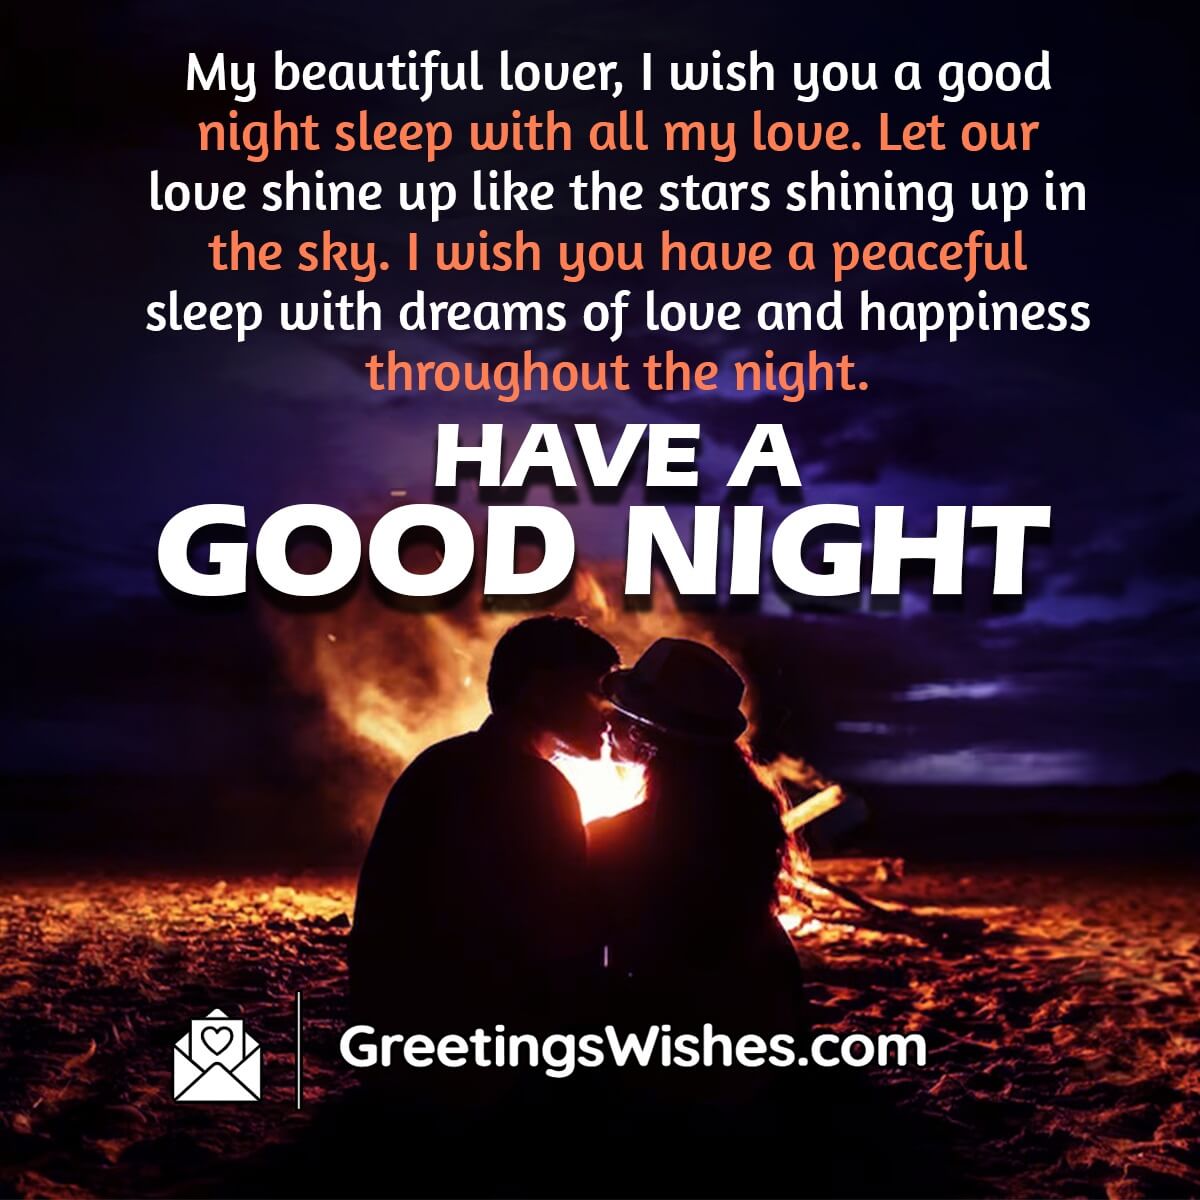 Good Night Wishes Messages to Lover